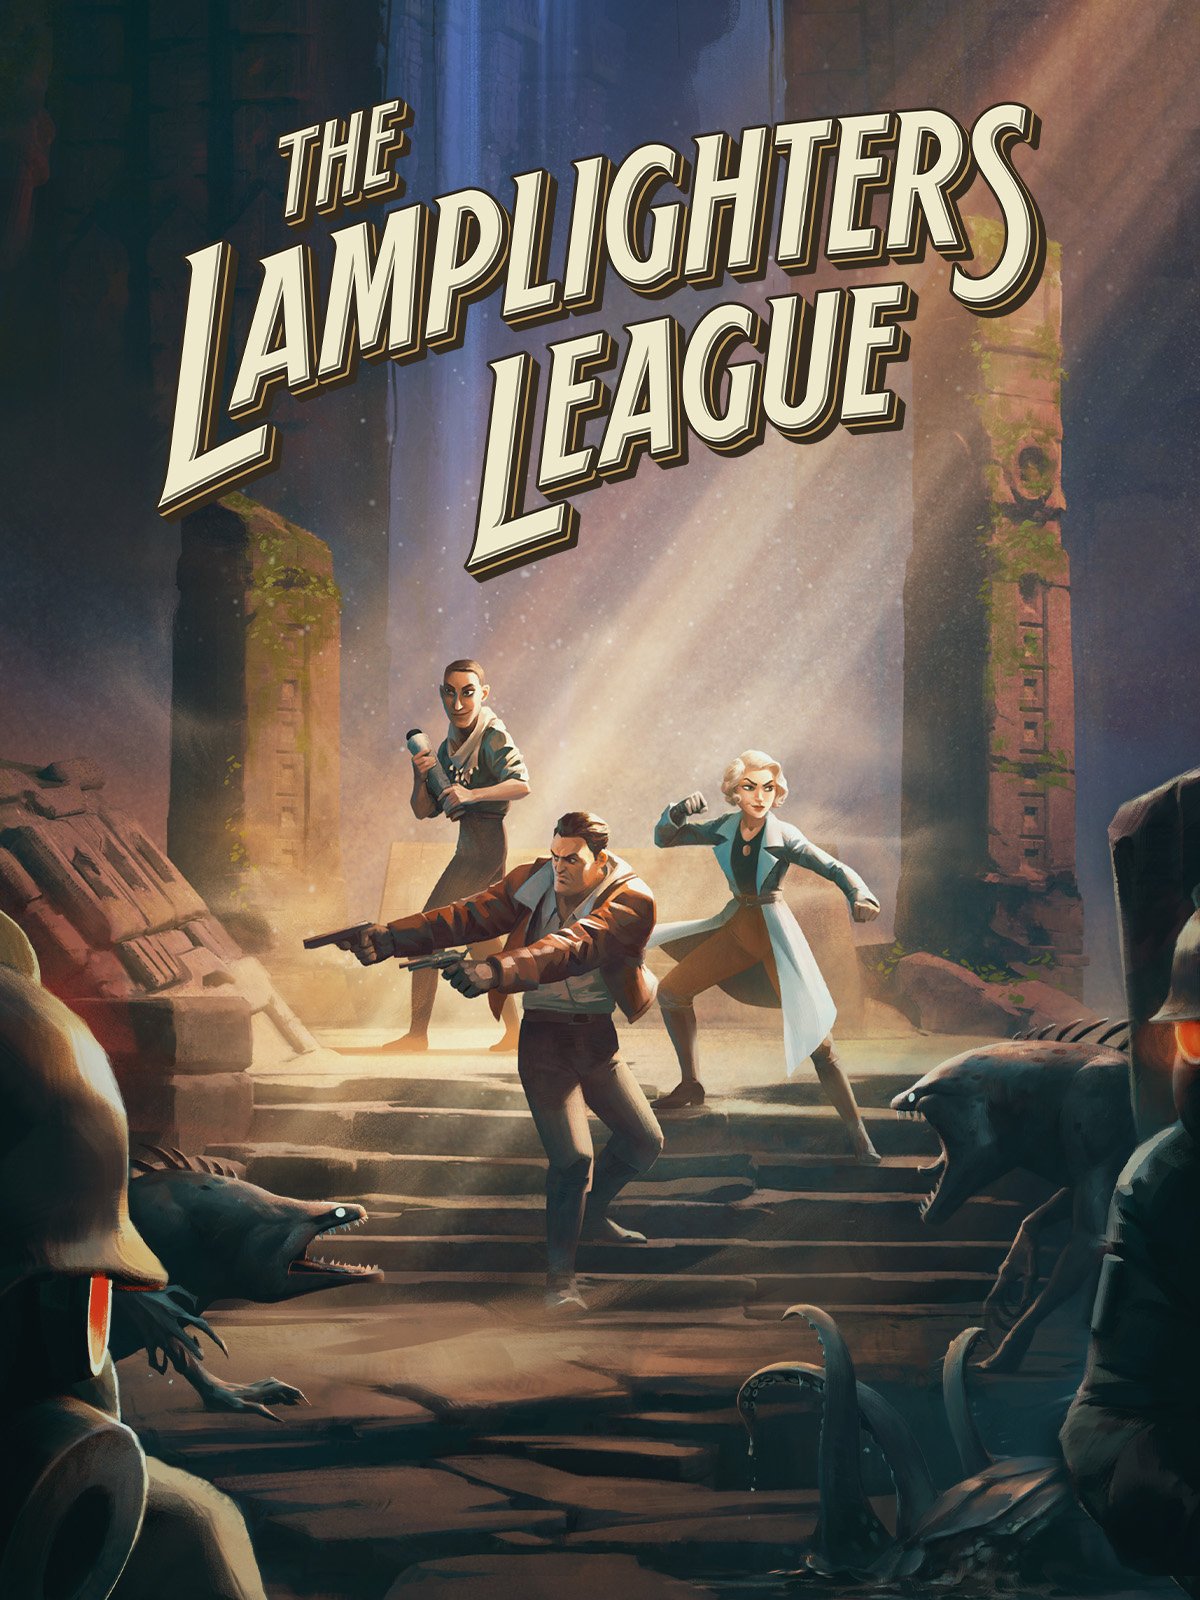 instal the new version for windows The Lamplighters League